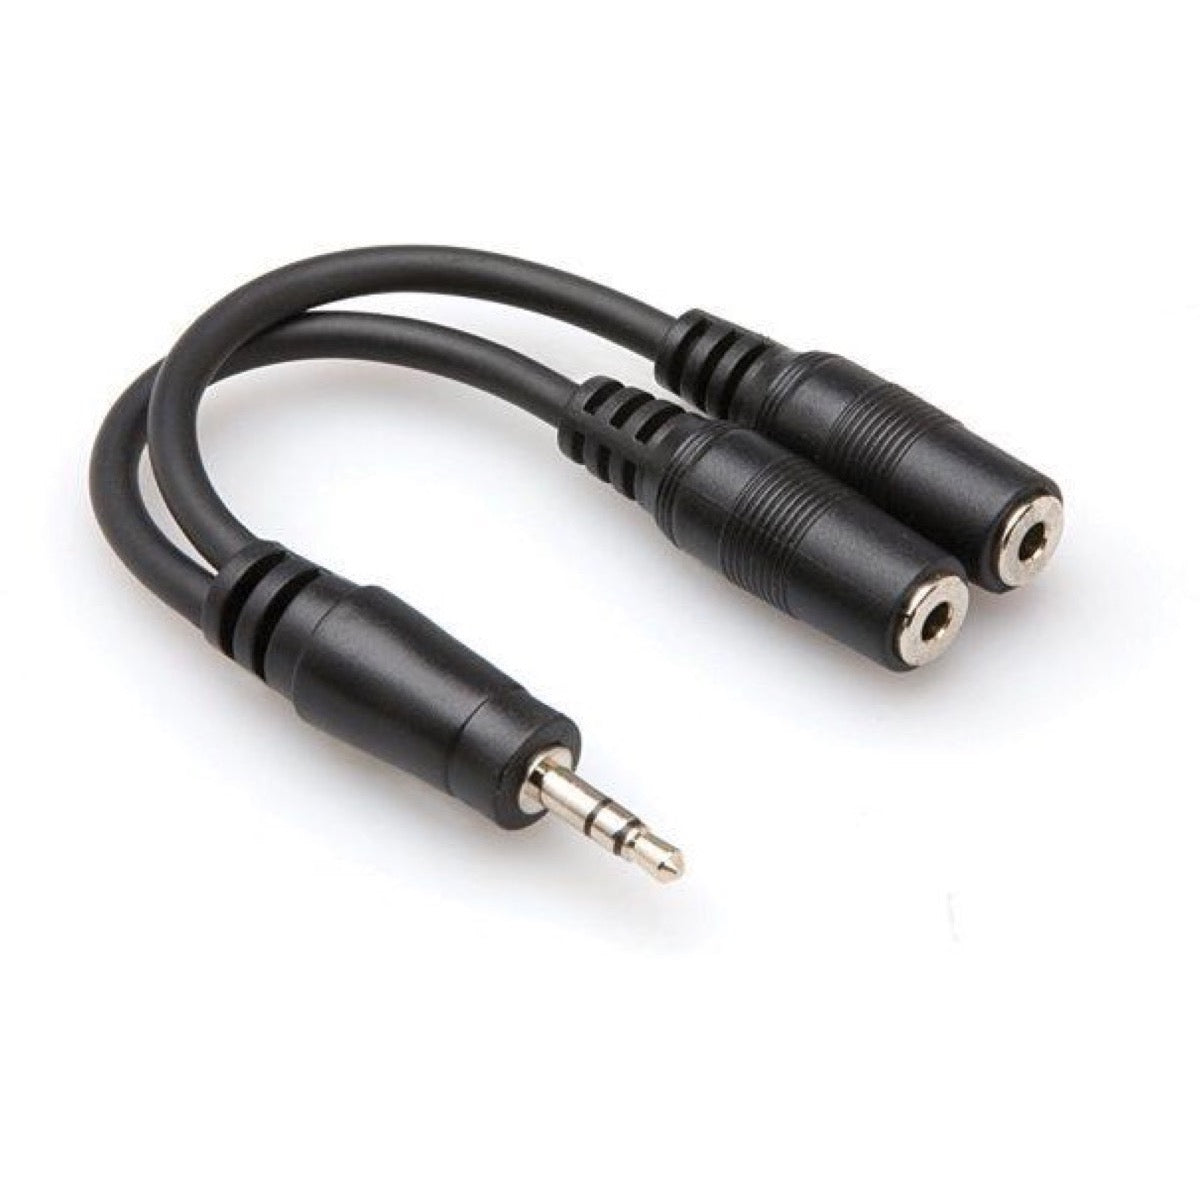 Hosa Stereo Breakout 1/8 Inch Male to Dual 1/8 Inch Female Cable, Black, YMM-232